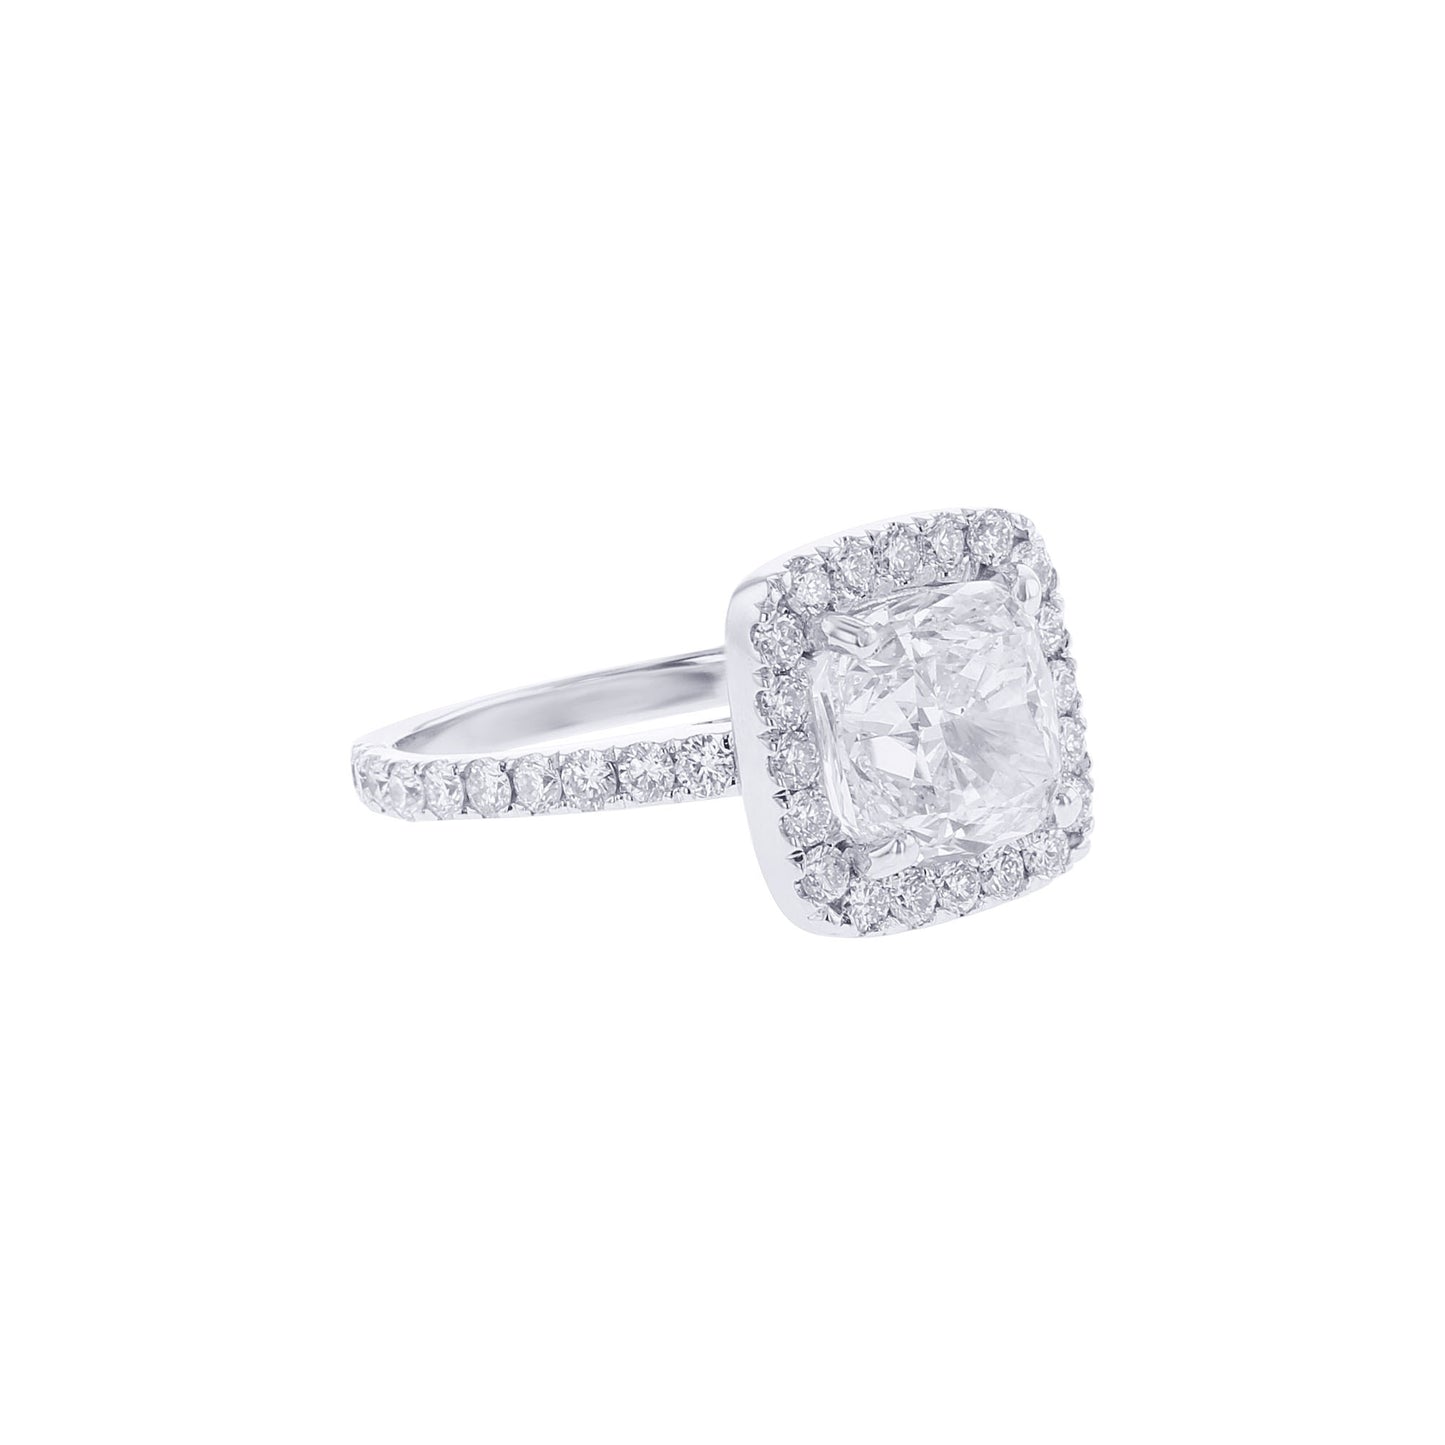 Giselle Certified Ready for Love Diamond Engagement Ring